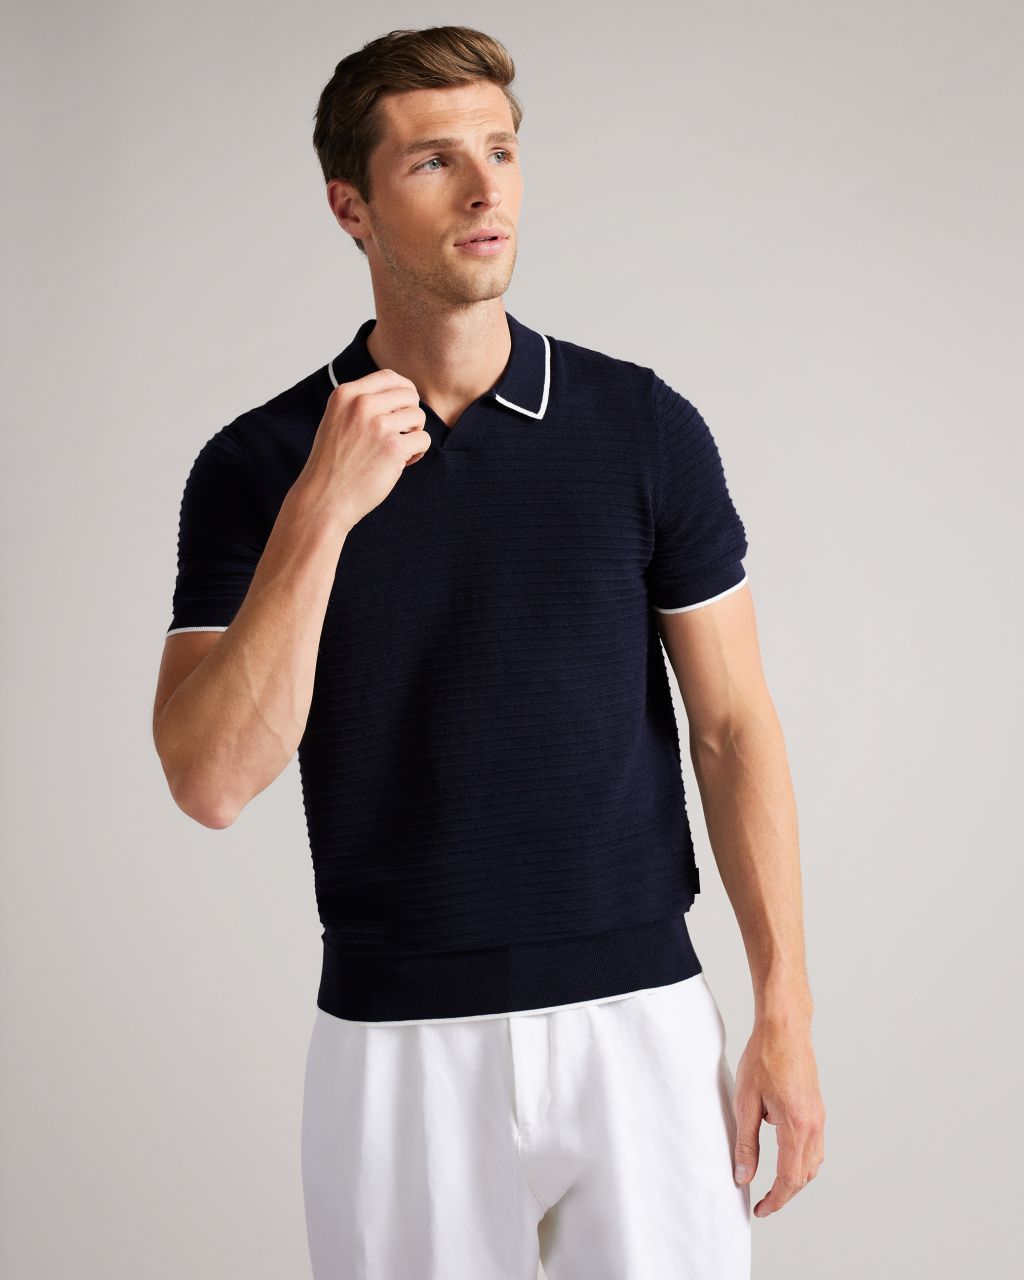 Ted Baker Men's Textured Stripe Knitted Polo Shirt in Navy, Durdle